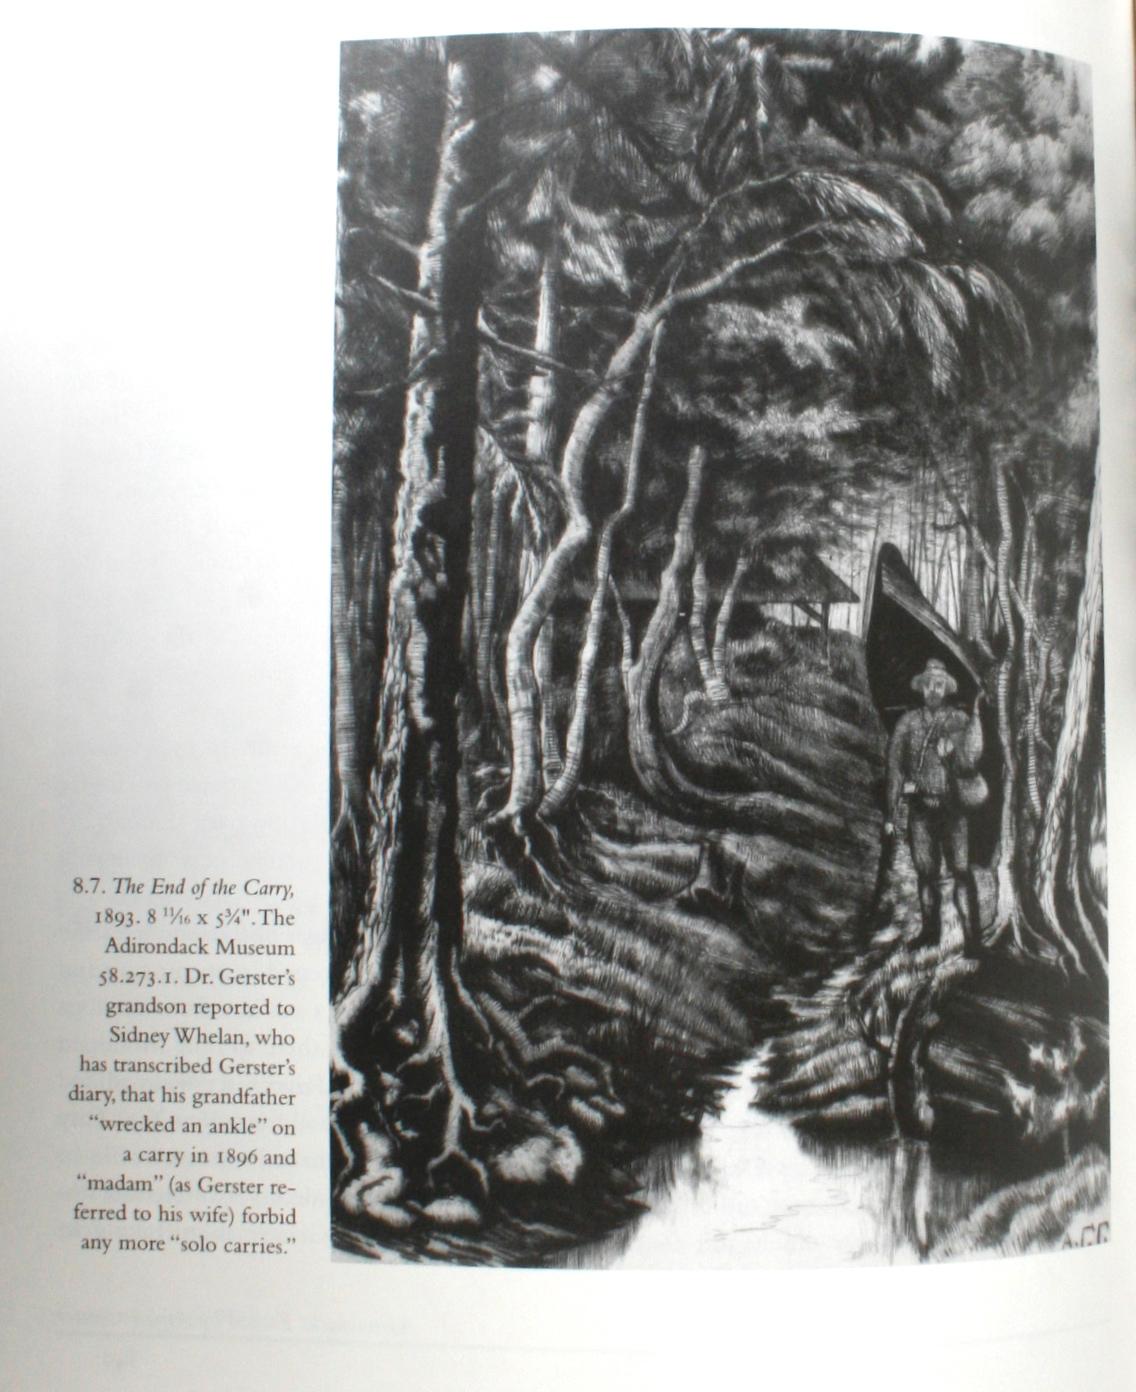 Adirondack Prints and Printmakers, The Call of the Wild, 1st Edition 11